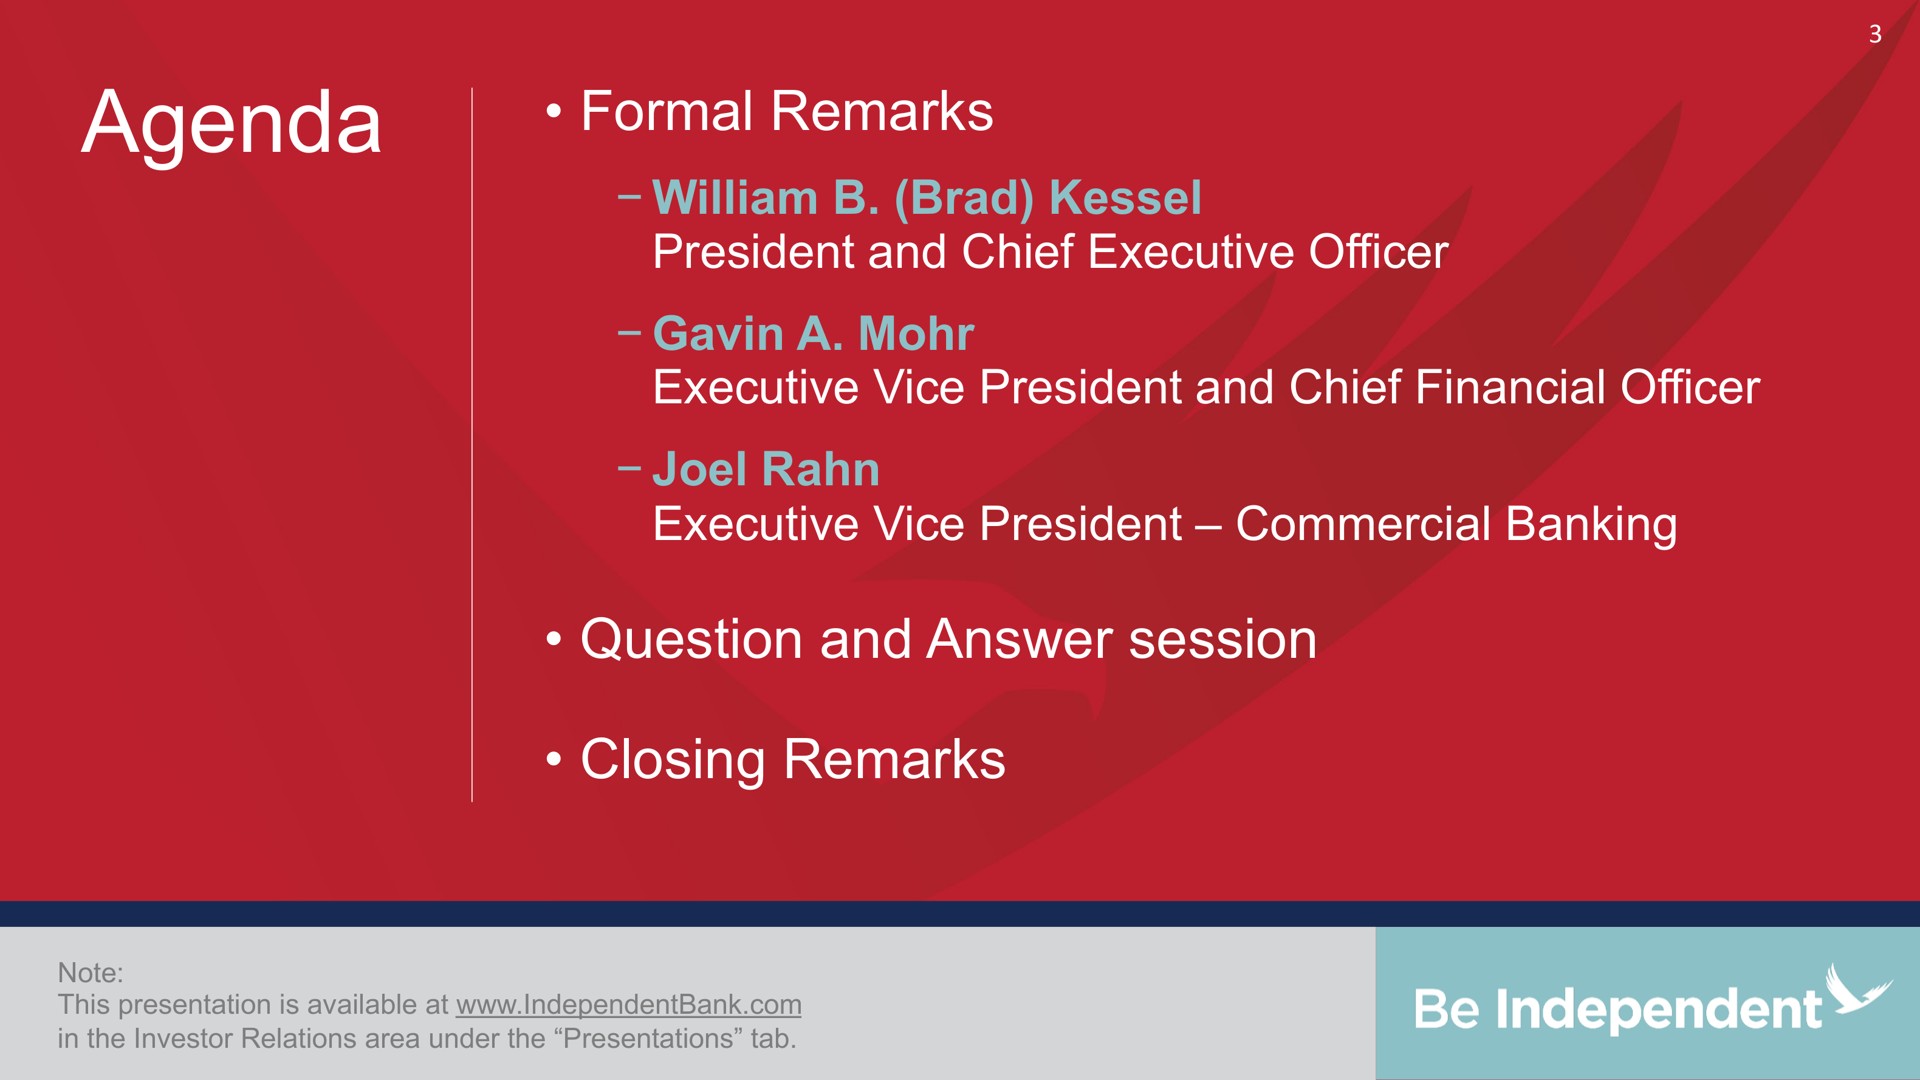 agenda formal remarks brad president and chief executive officer a mohr executive vice president and chief financial officer executive vice president commercial banking question and answer session closing remarks mater at | Independent Bank Corp